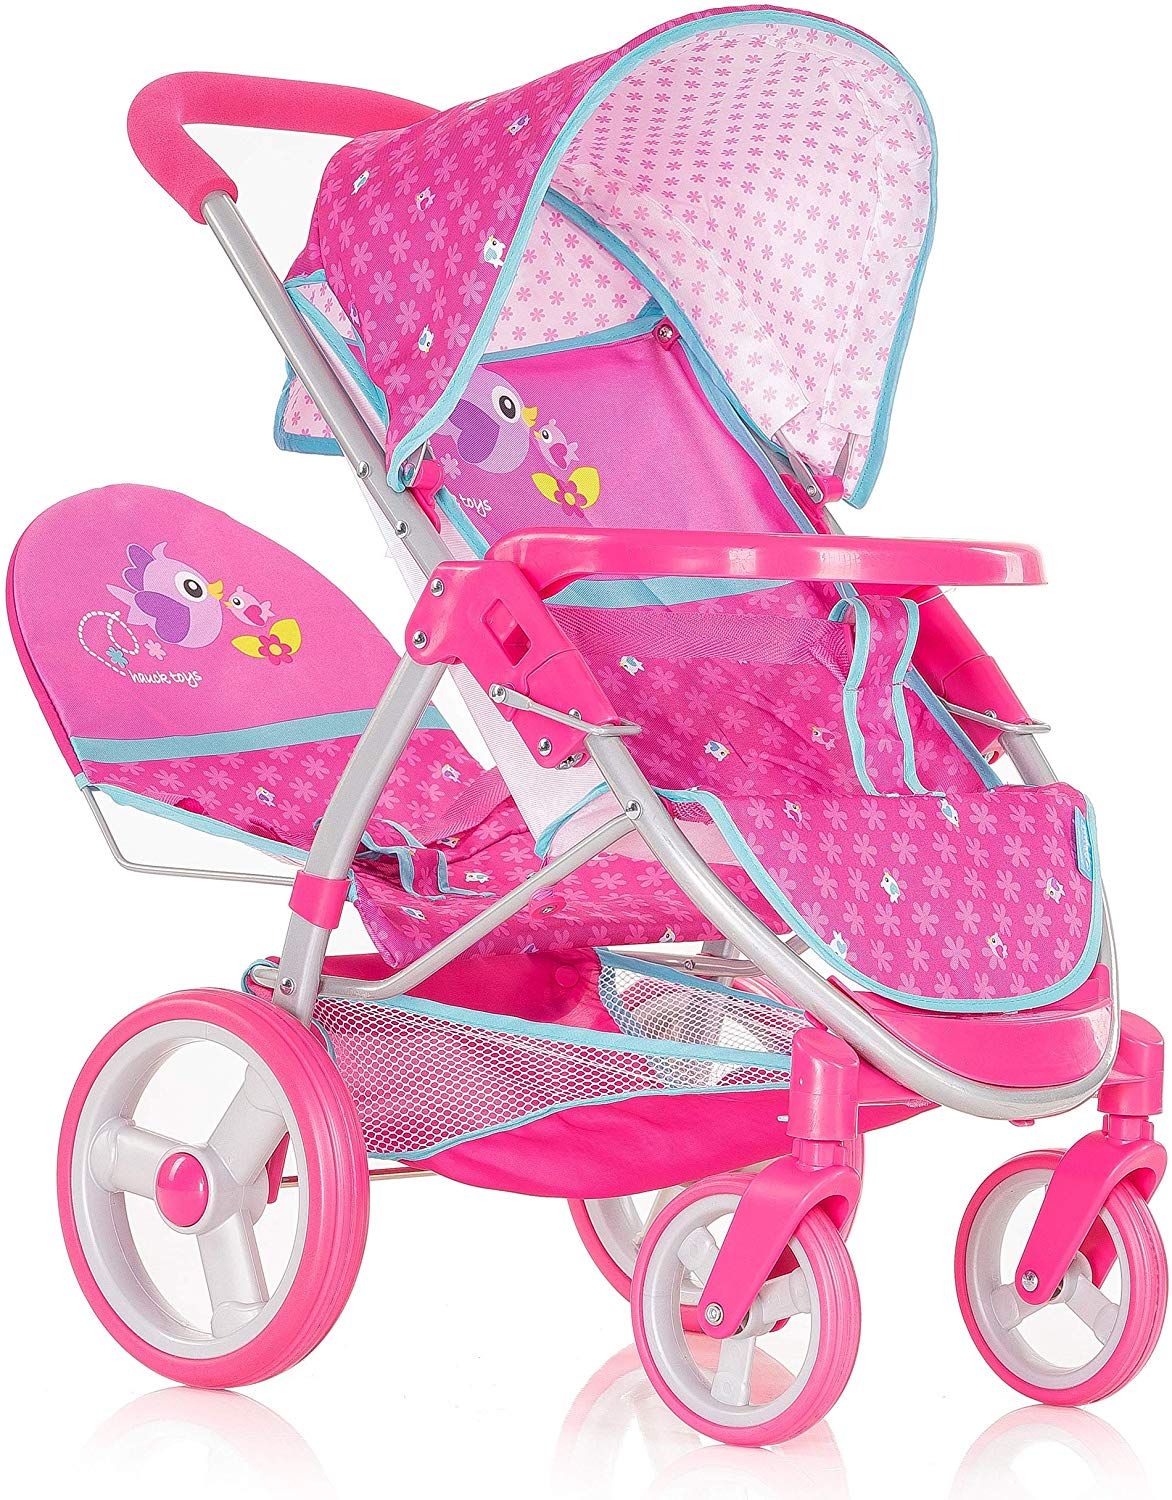 Hauck Twin and siblings Malibu Duo, lockable front wheels, removable safety bar, adjustable sun canopy, 360° pirouette wheels, birdie pink